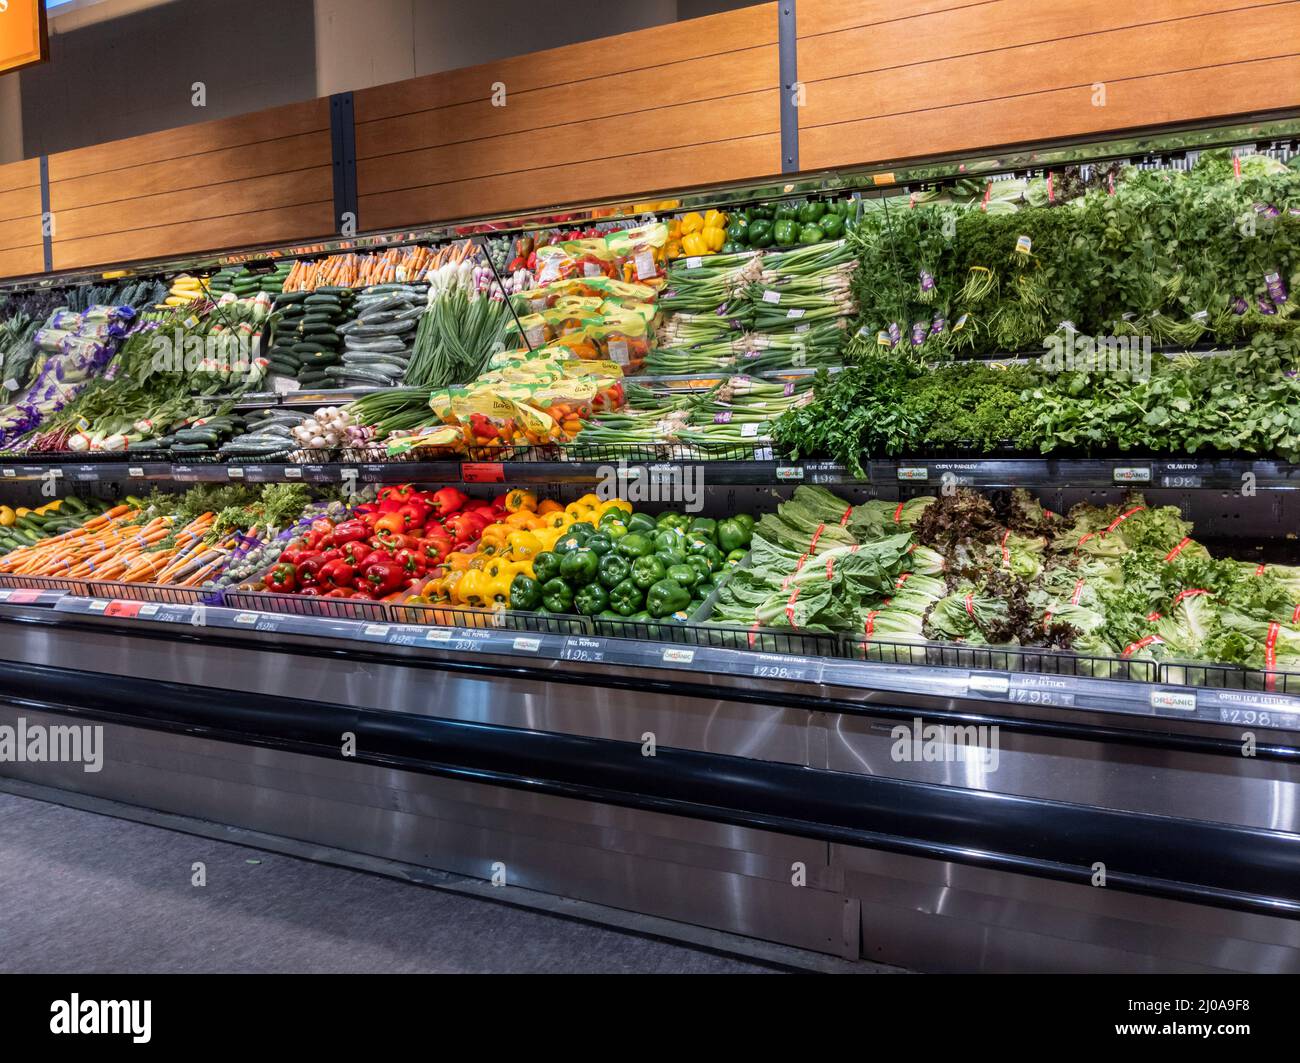 https://c8.alamy.com/comp/2J0A9F8/lynnwood-wa-usa-circa-march-2022-angled-view-of-fresh-delicious-vegetables-in-the-produce-department-inside-a-town-and-country-grocery-store-2J0A9F8.jpg